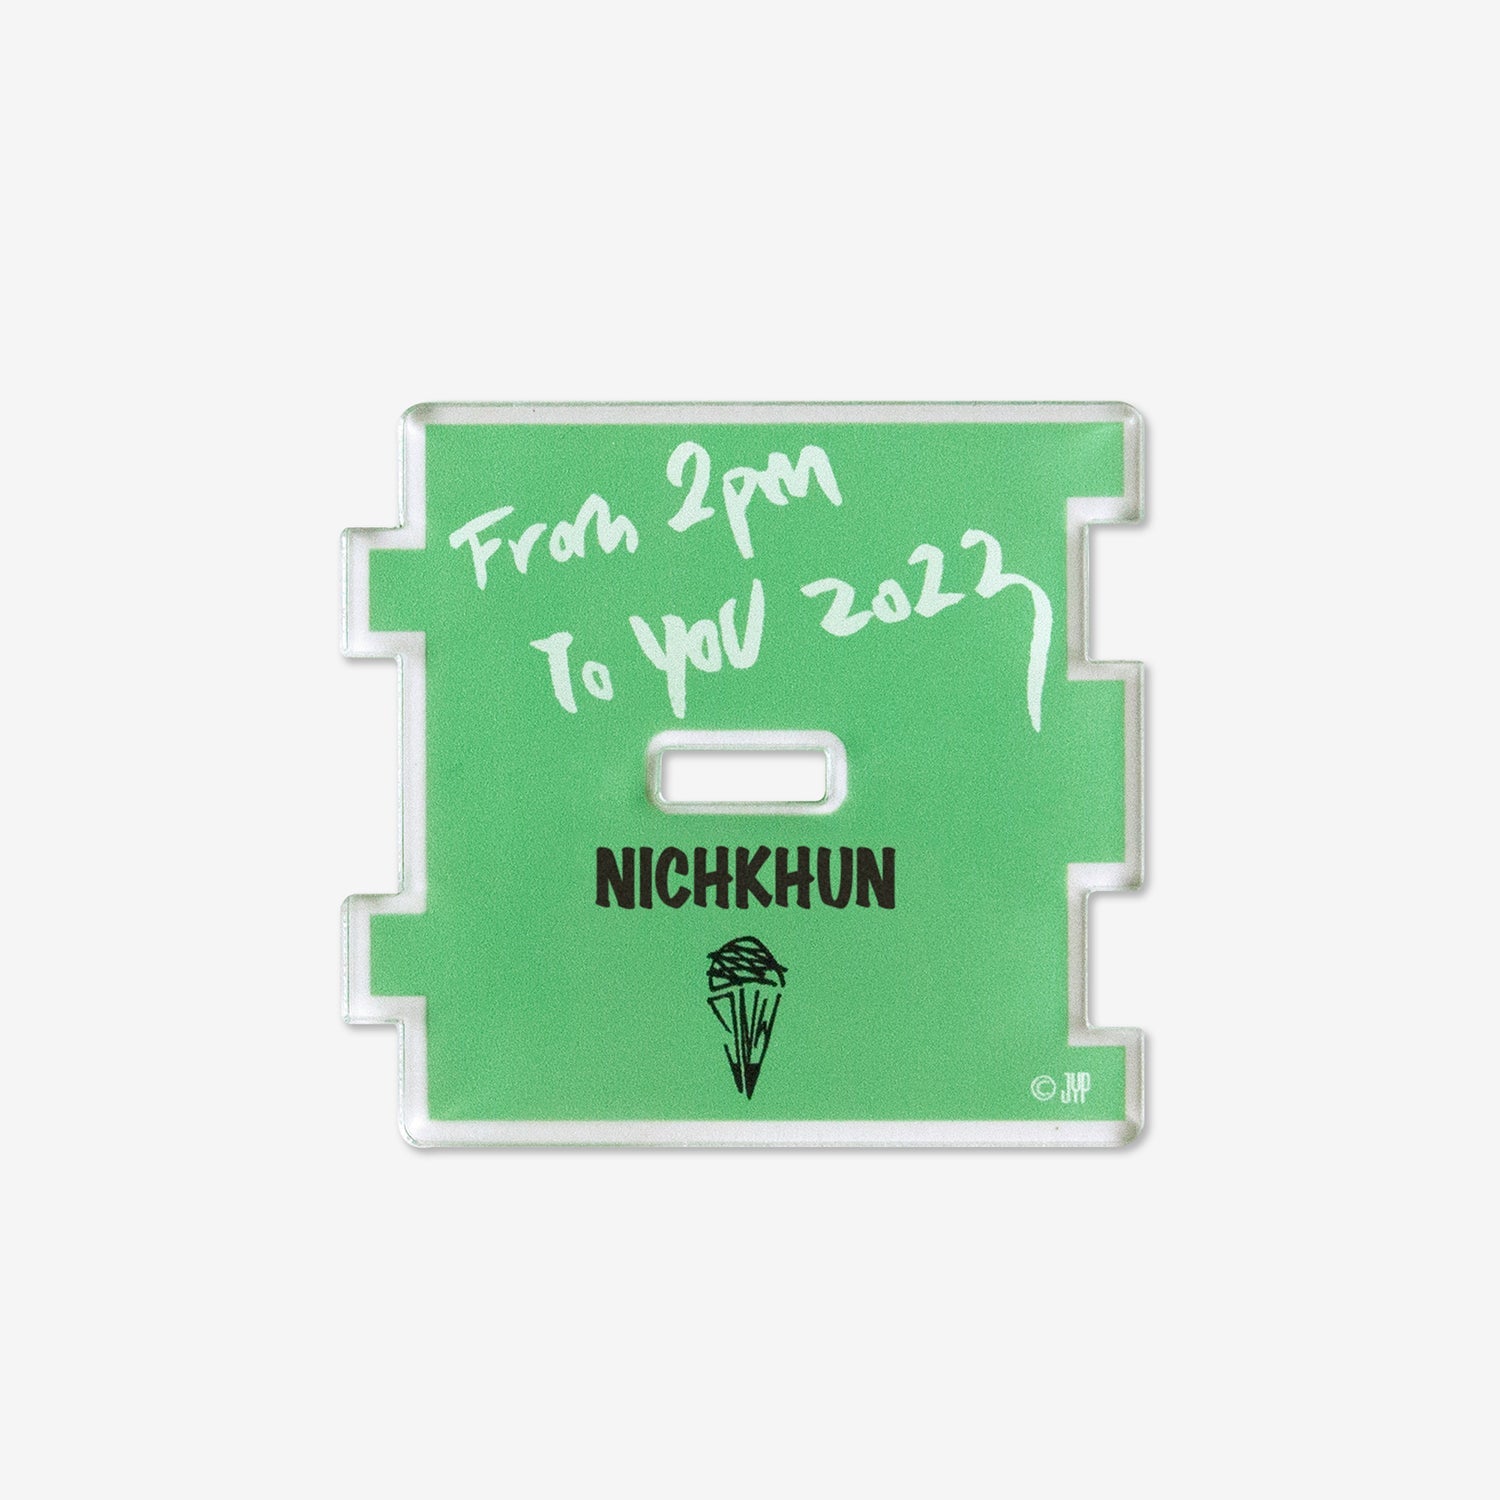 ACRYLIC STAND - NICHKHUN『From 2PM To You 2023』